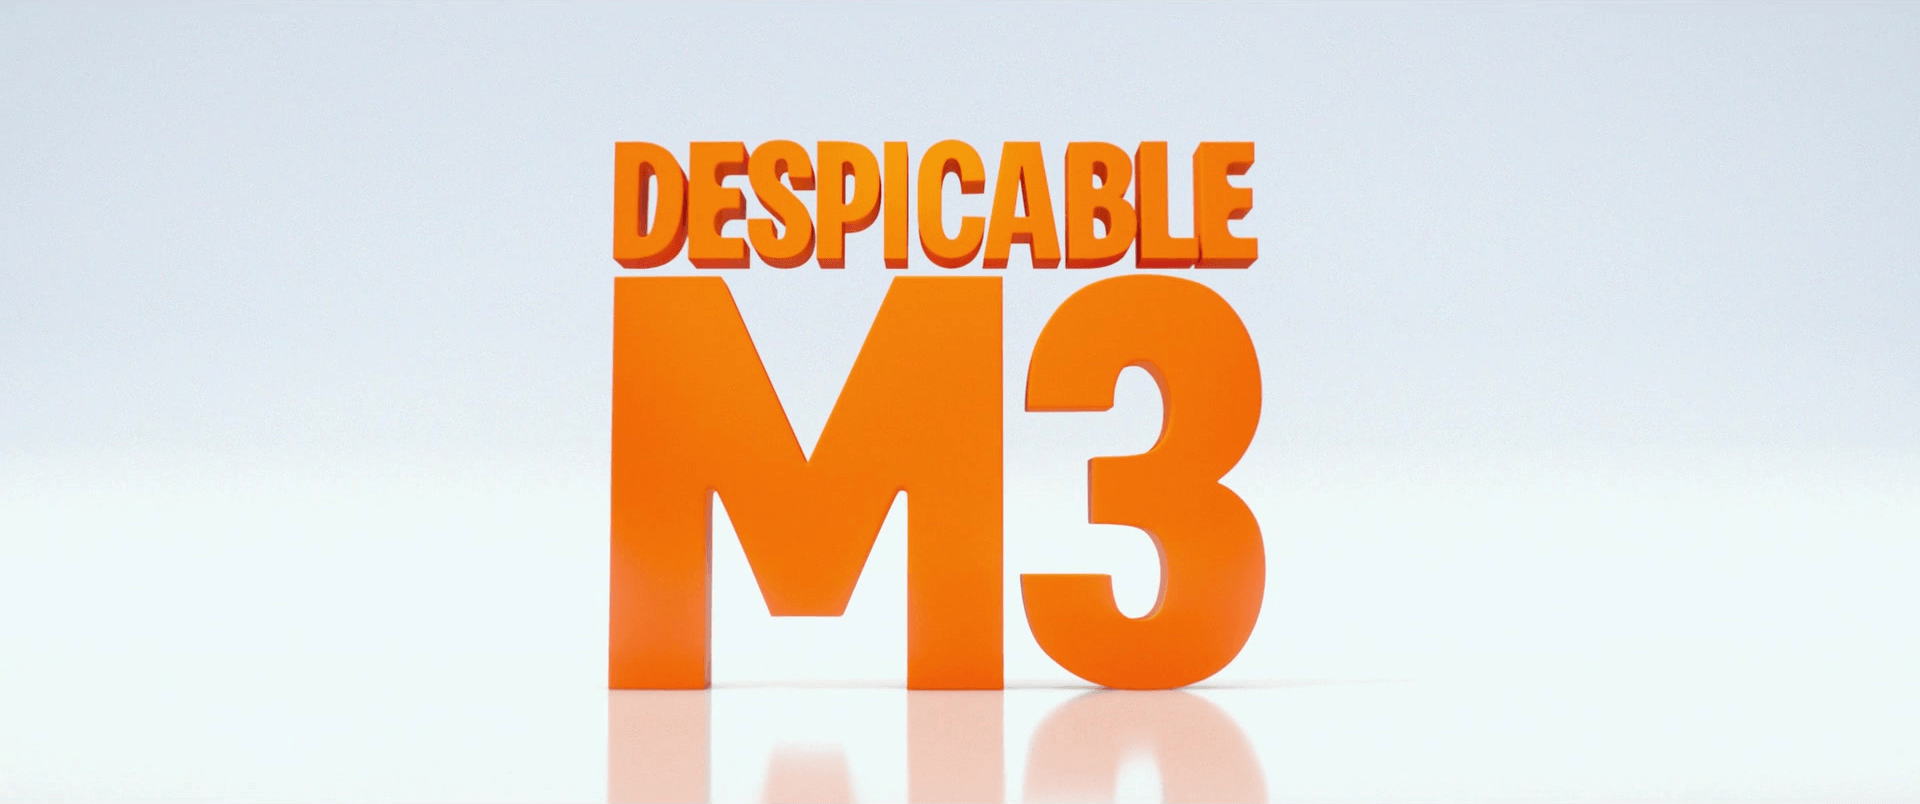 Despicable Me 1 Logo - Despicable Me 3 | Universal Studios Wiki | FANDOM powered by Wikia